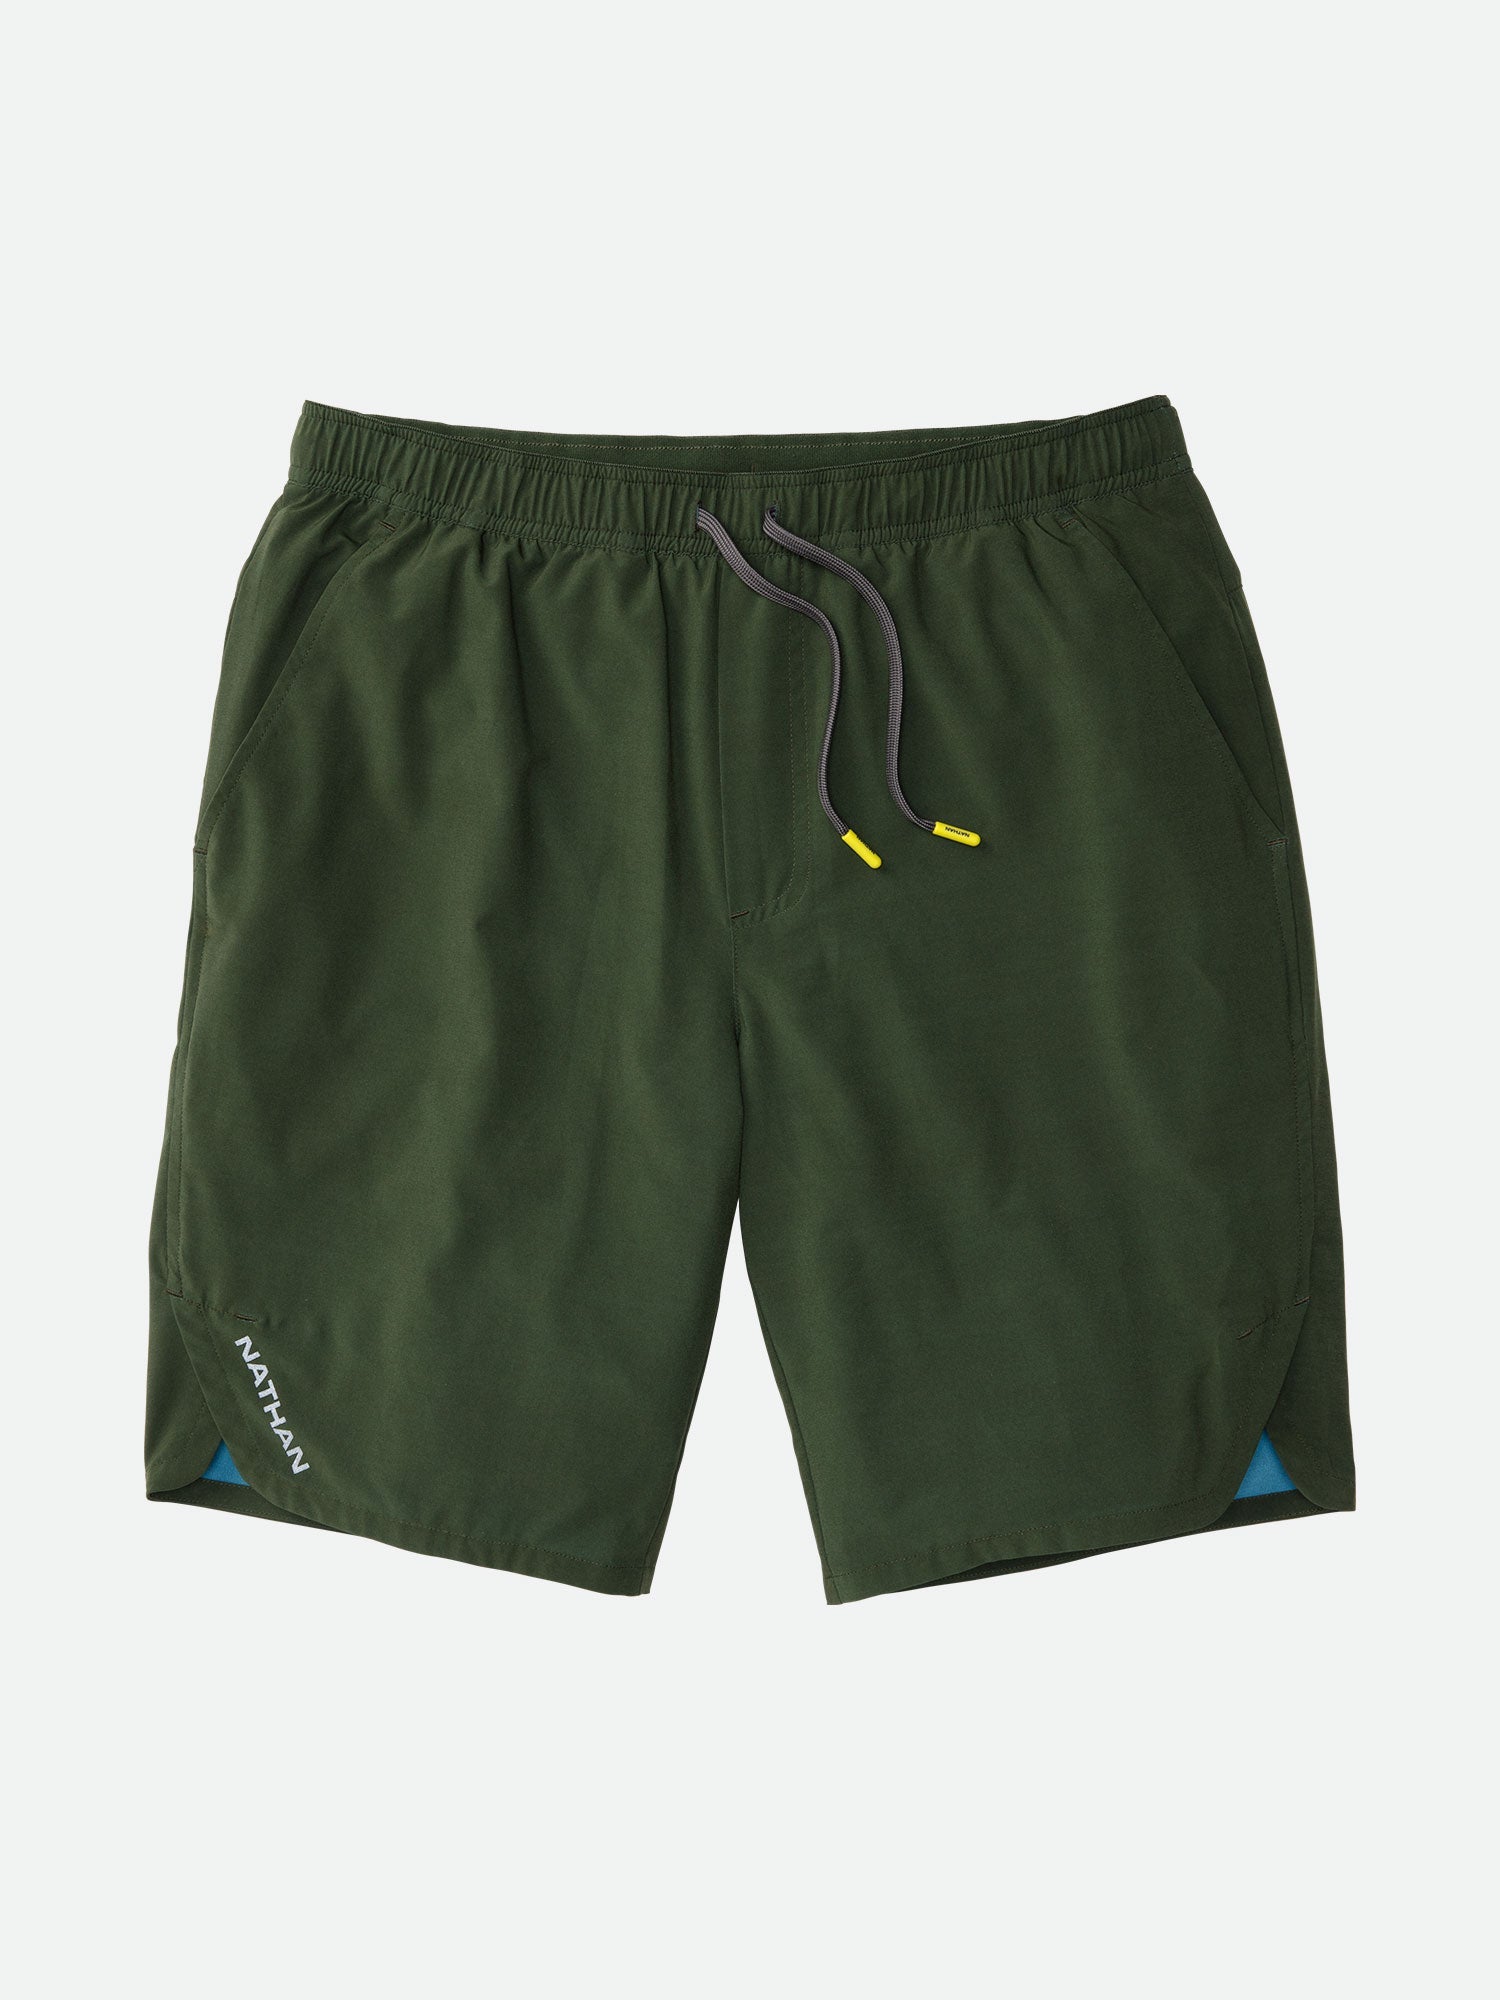 Shop Nathan Essential Shorts 7 Unlined